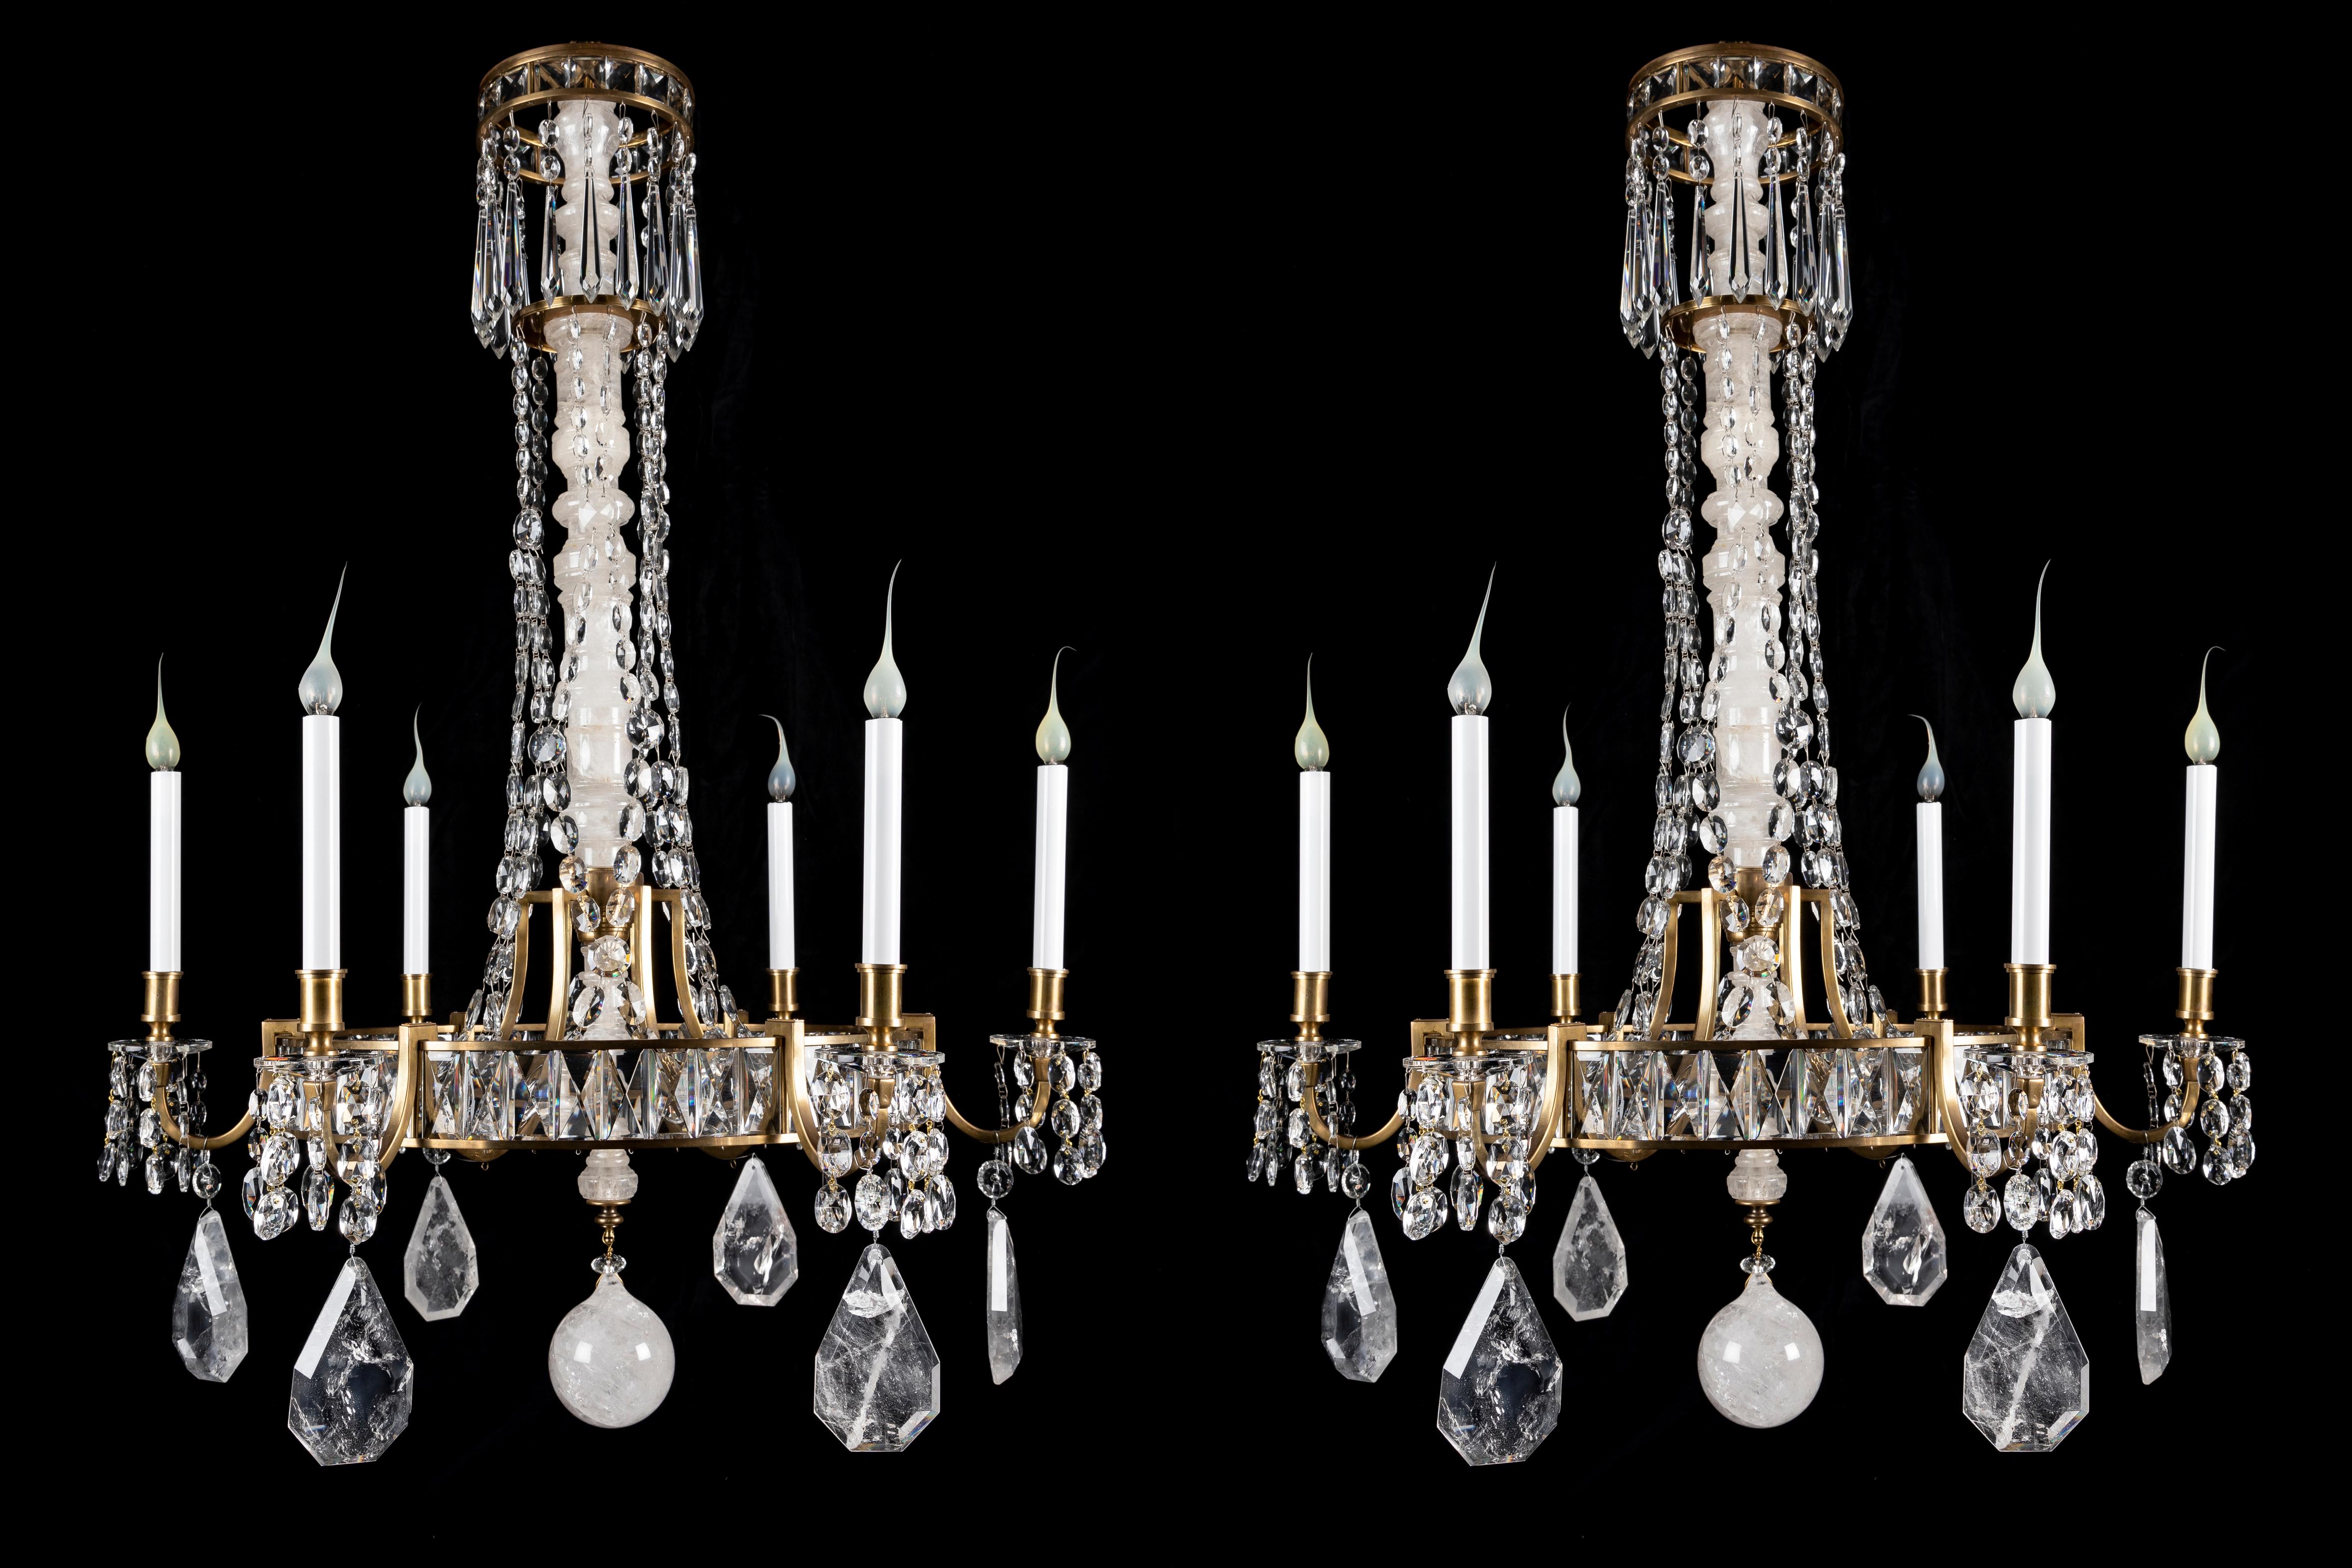 A Pair of Unique Large  French Hollywood Regency Bagues Style circular form gilt bronze, cut rock crystal and crystal multi light chandeliers of fine quality. This pair of  unusual chandeliers are embellished with  a large central shaft of hand